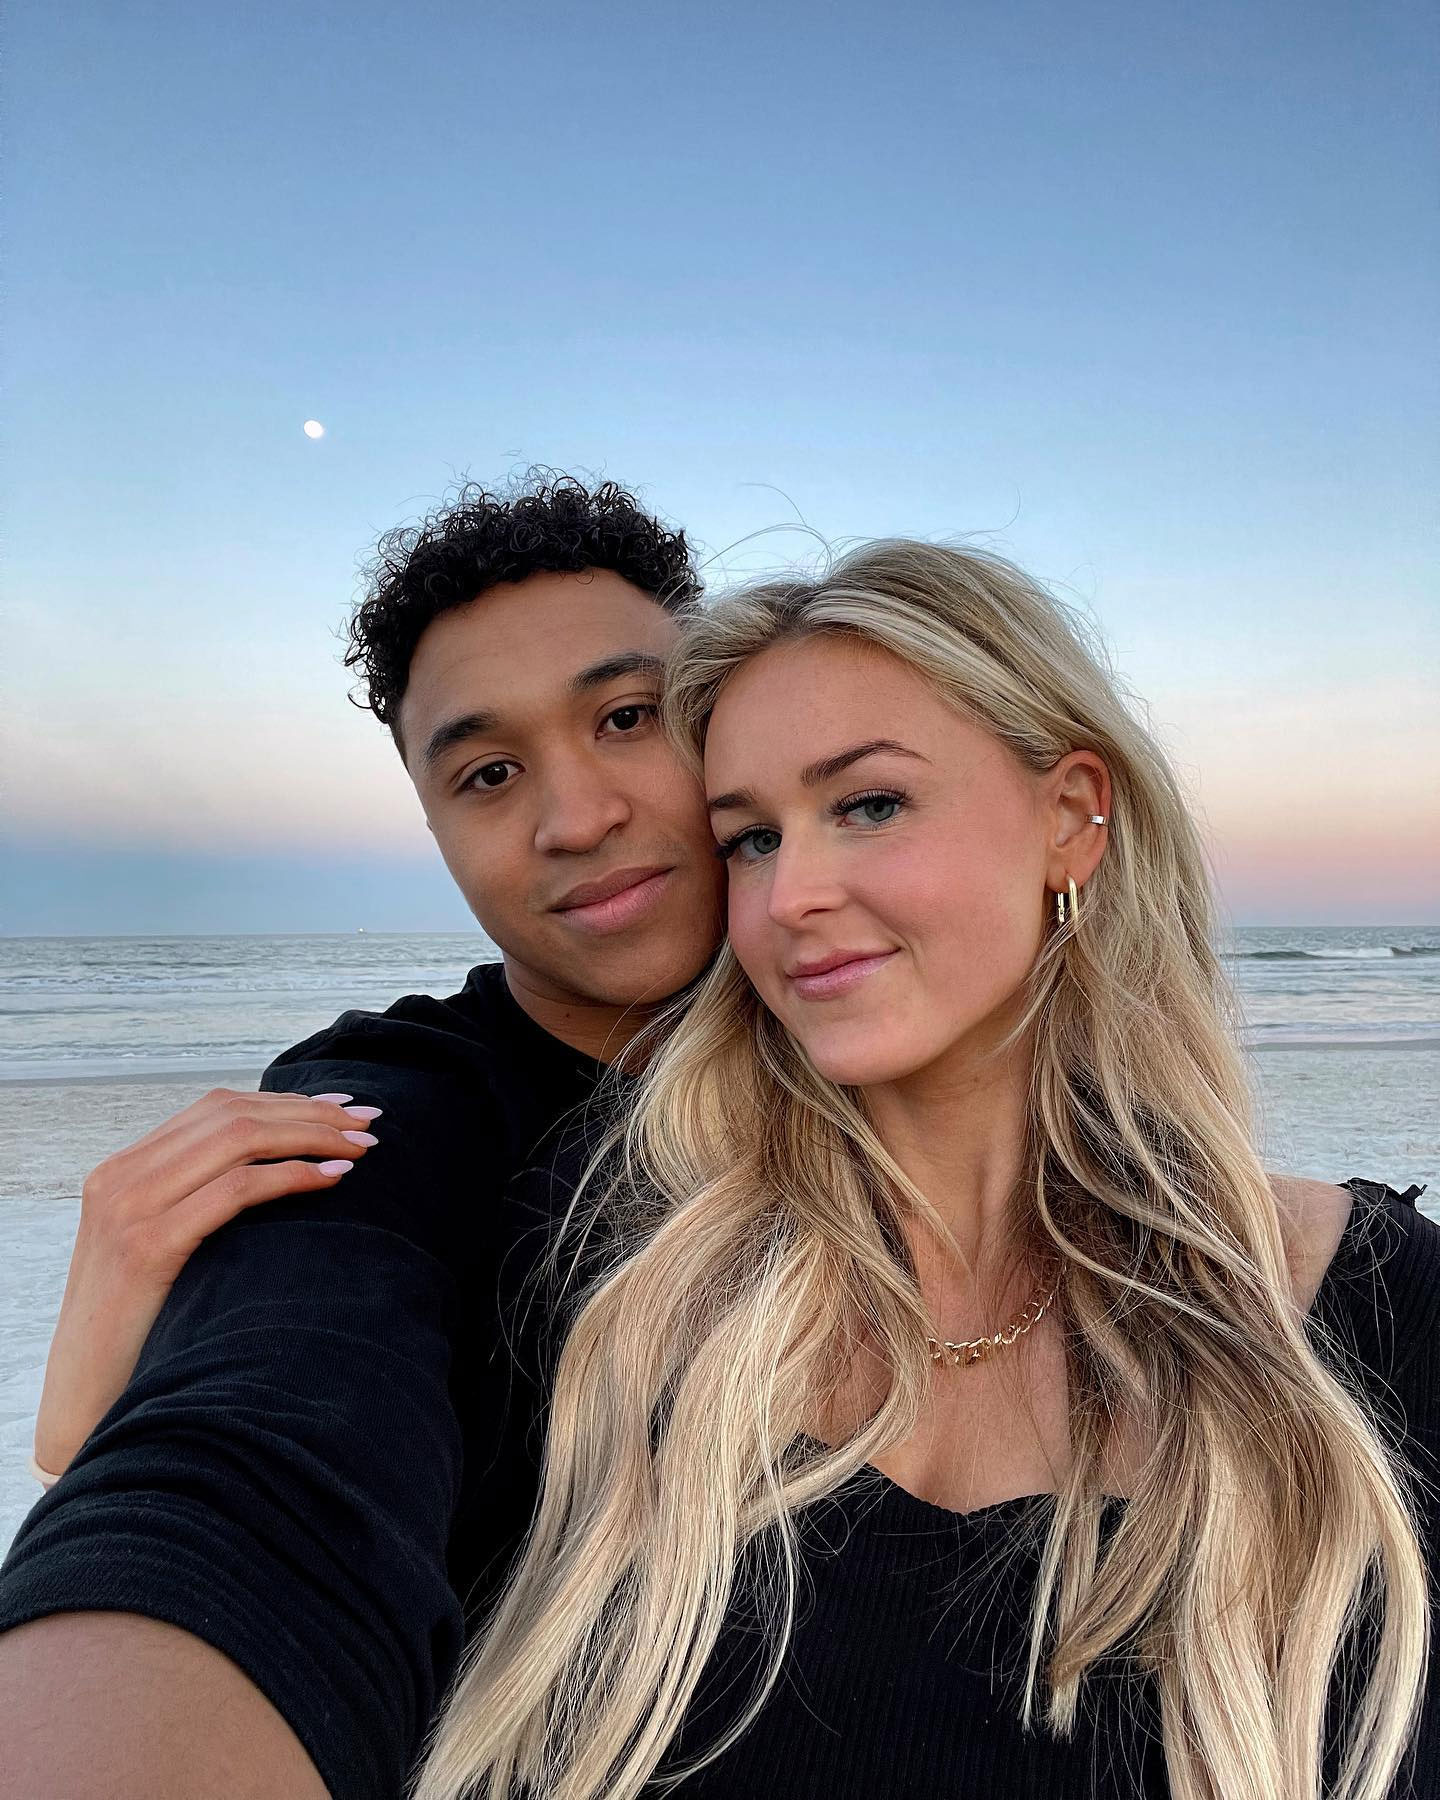 Brylee Ivers Instagram Dancing With the Stars Pro Brandon Armstrong Is Engaged to Brylee Ivers